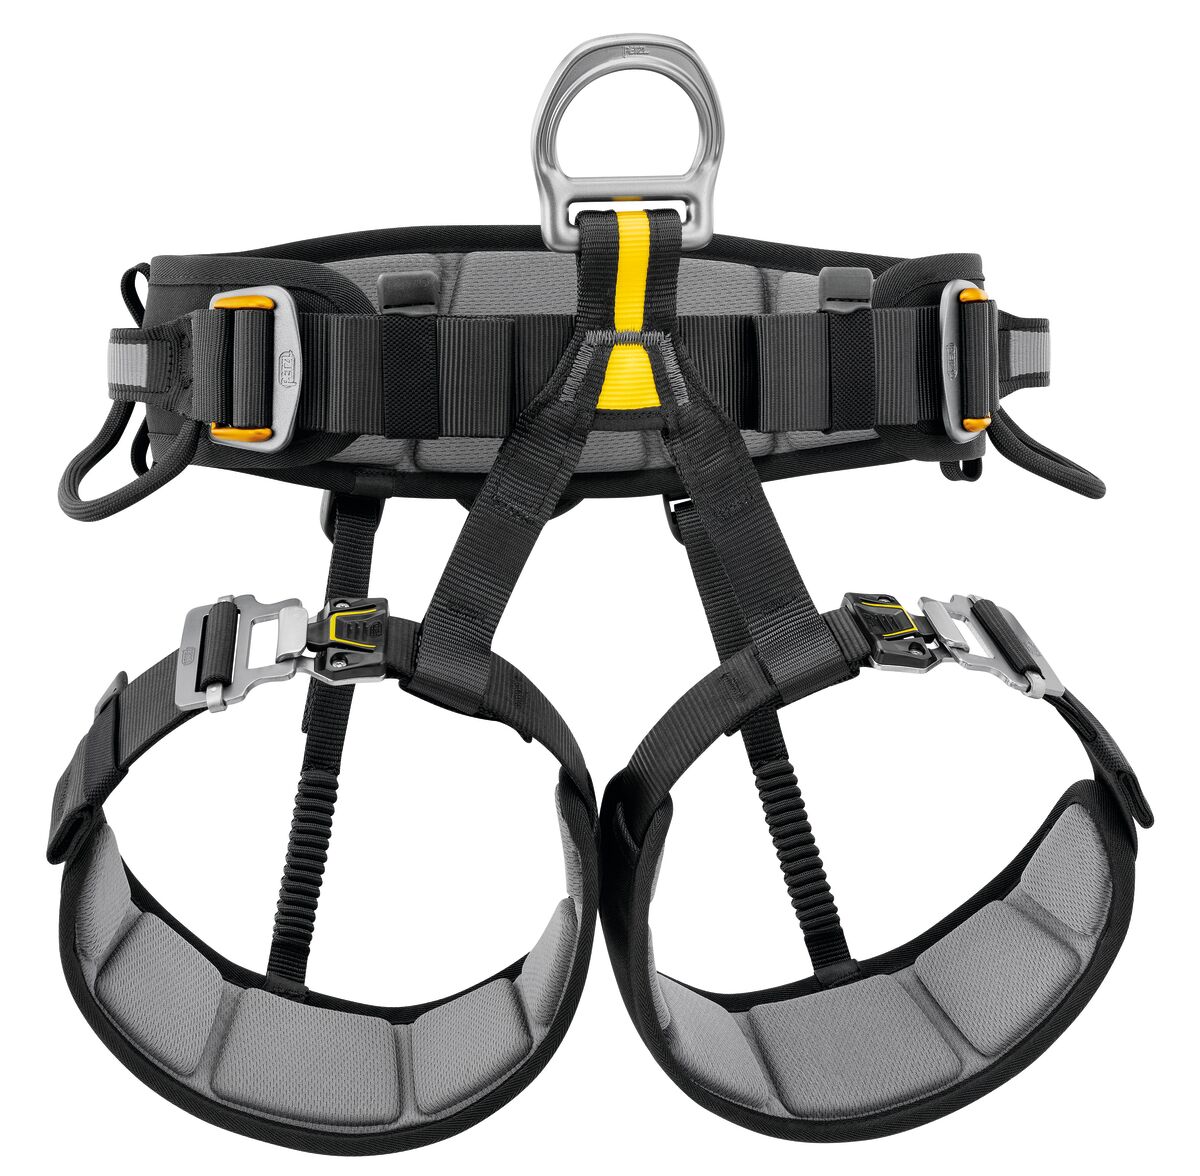 FALCON, Lightweight and comfortable seat harness for suspended